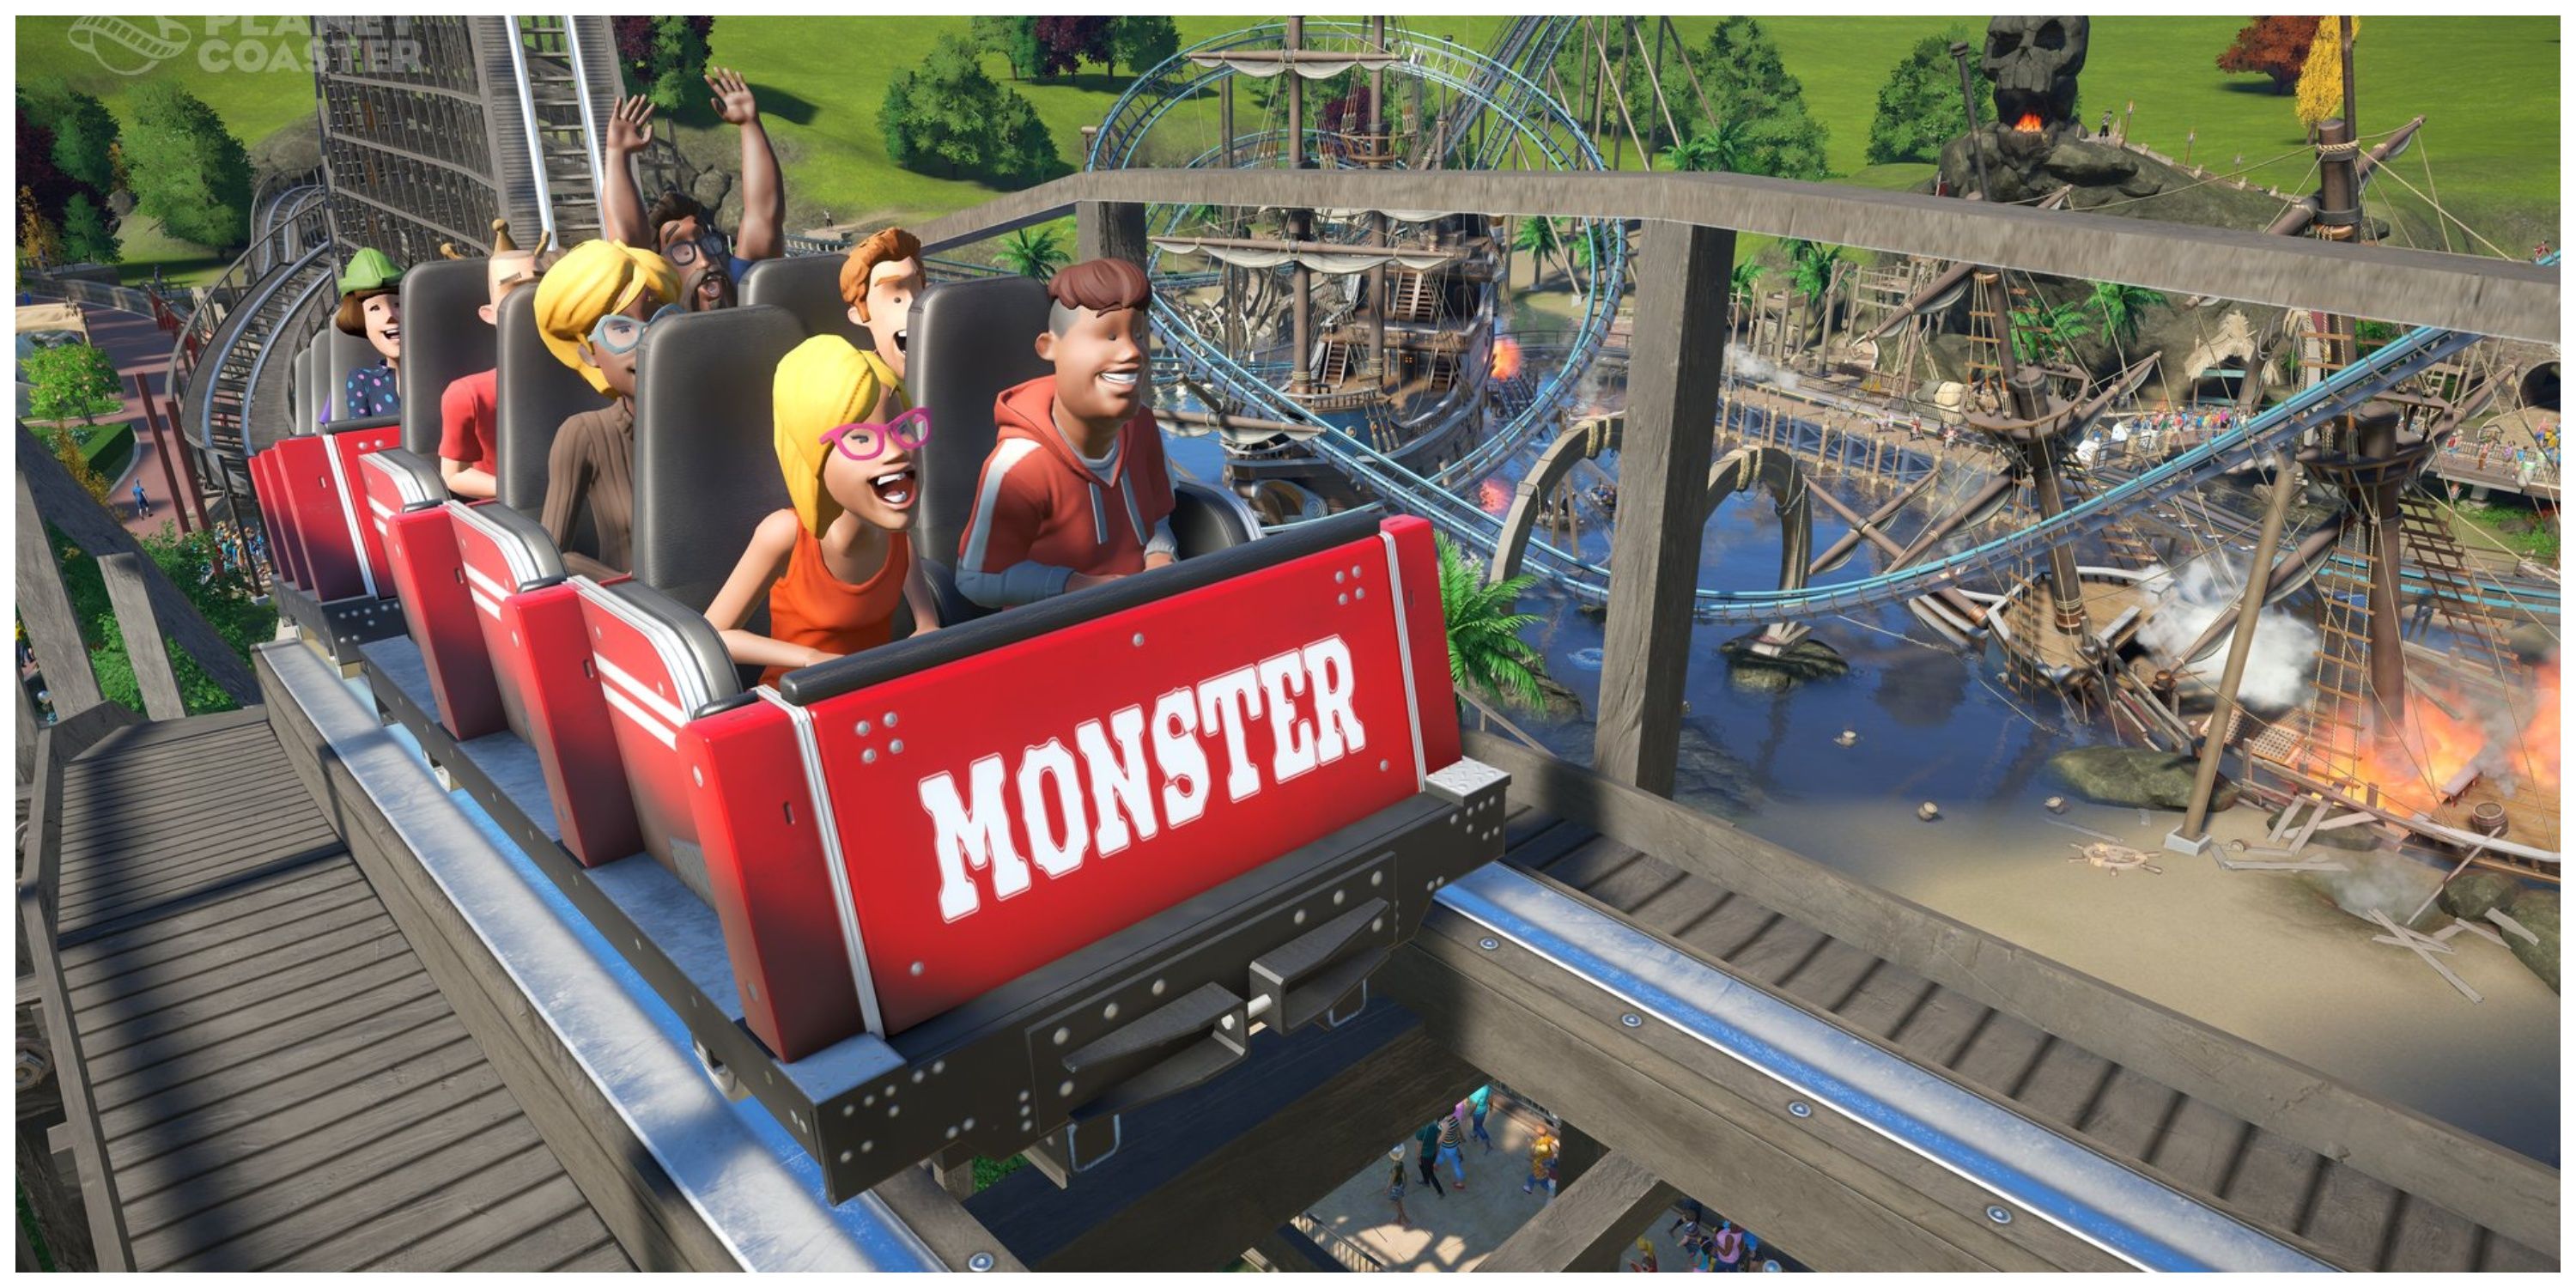 Planet Coaster - Steam Store Page Screenshot (Customers On A Roller-Coaster)